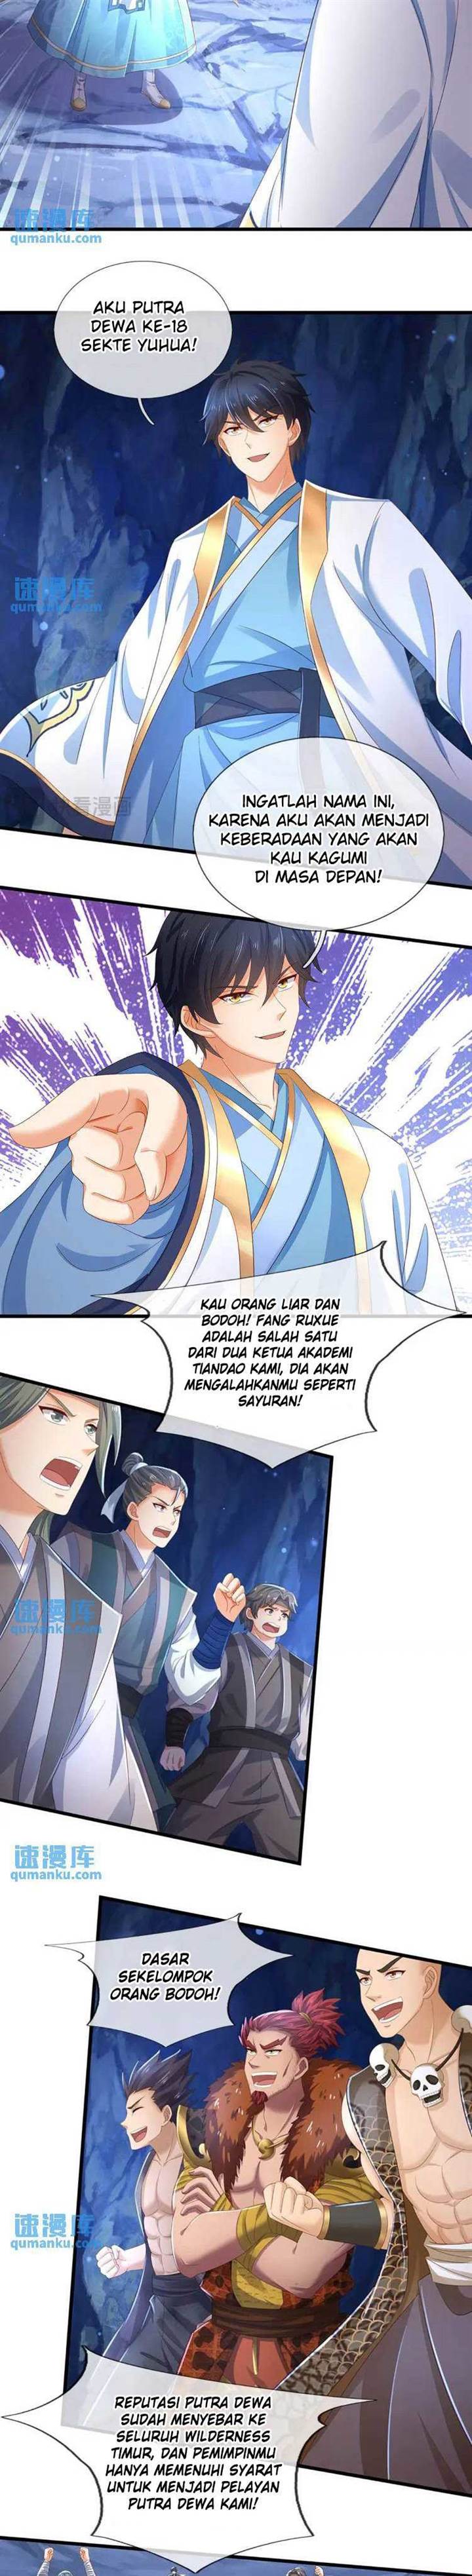 Star Sign In To Supreme Dantian Chapter 278